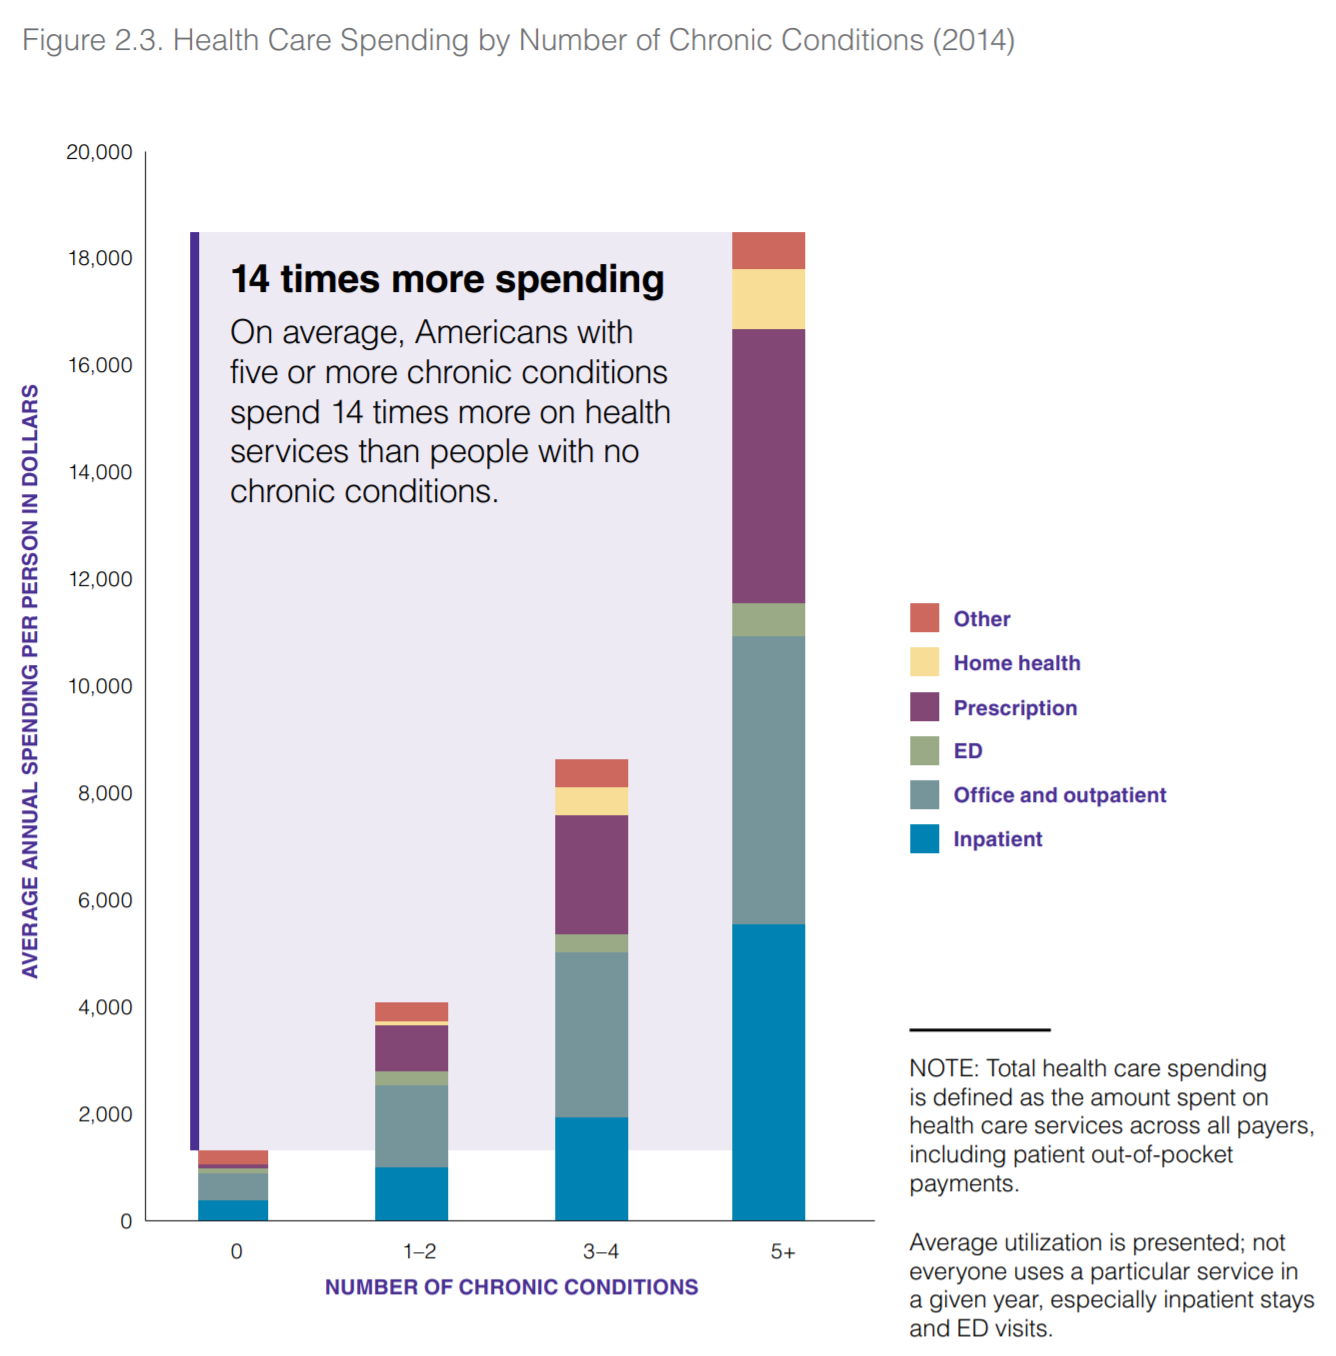 Health Care Spending by Number of Chronic Conditions (2014)